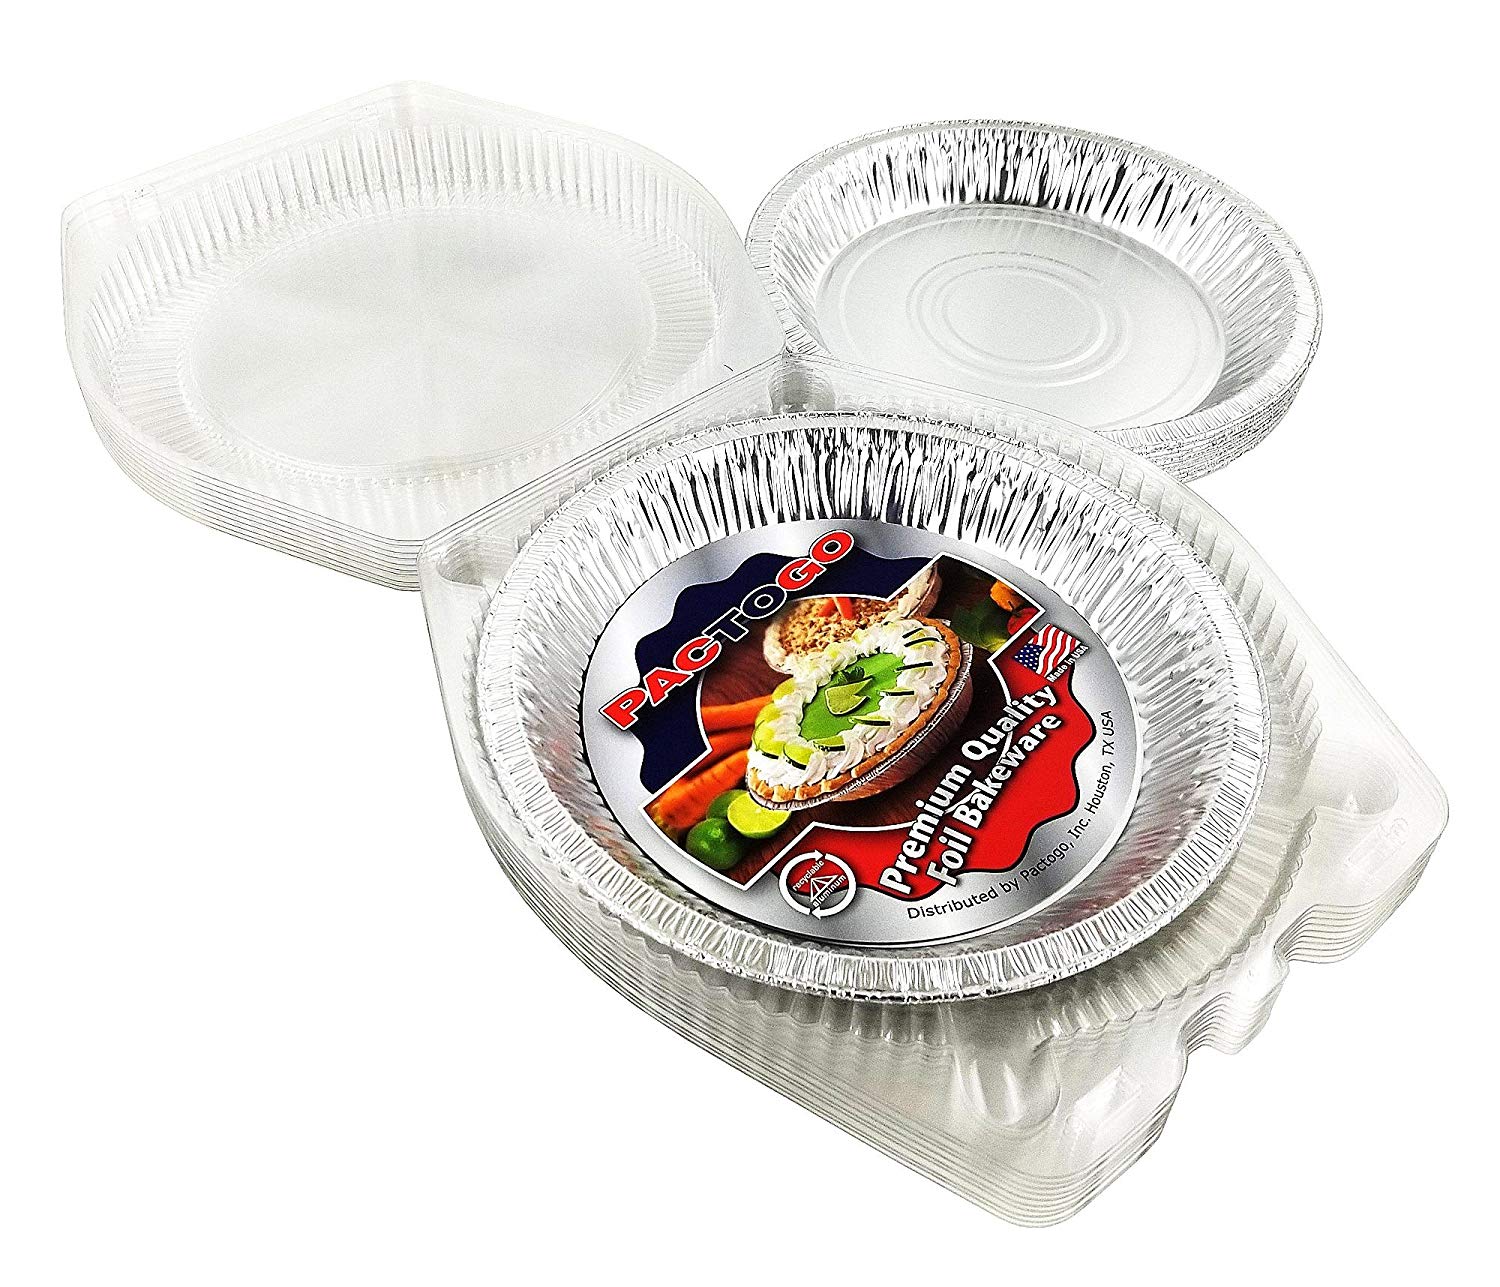 Pactogo 10" Foil Pie Pan 1-3/16" Deep w/Clear Low Dome Clamshell Container Combo 50/PK